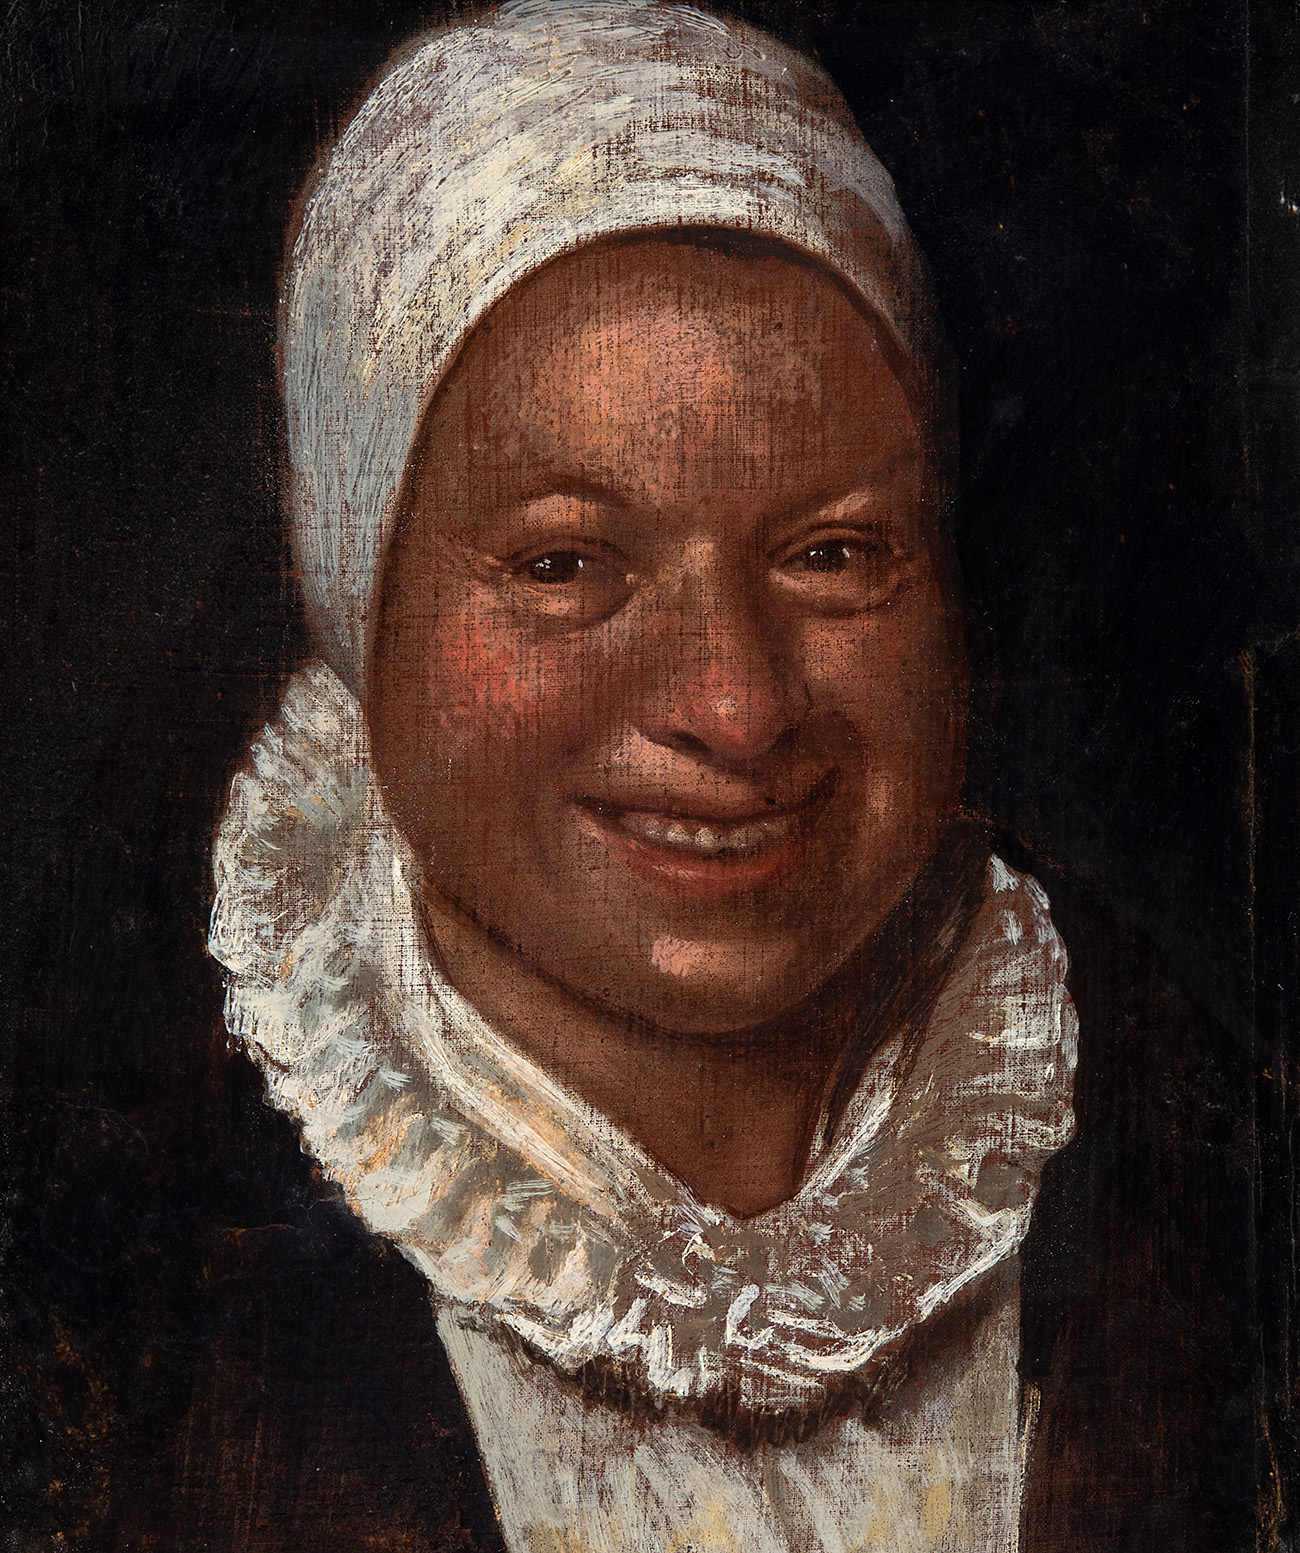 Modelled on ADRIAEN BROUWER (Belgium, 1605 - 1638), late 19th century."Woman.Oil on canvas.Size: